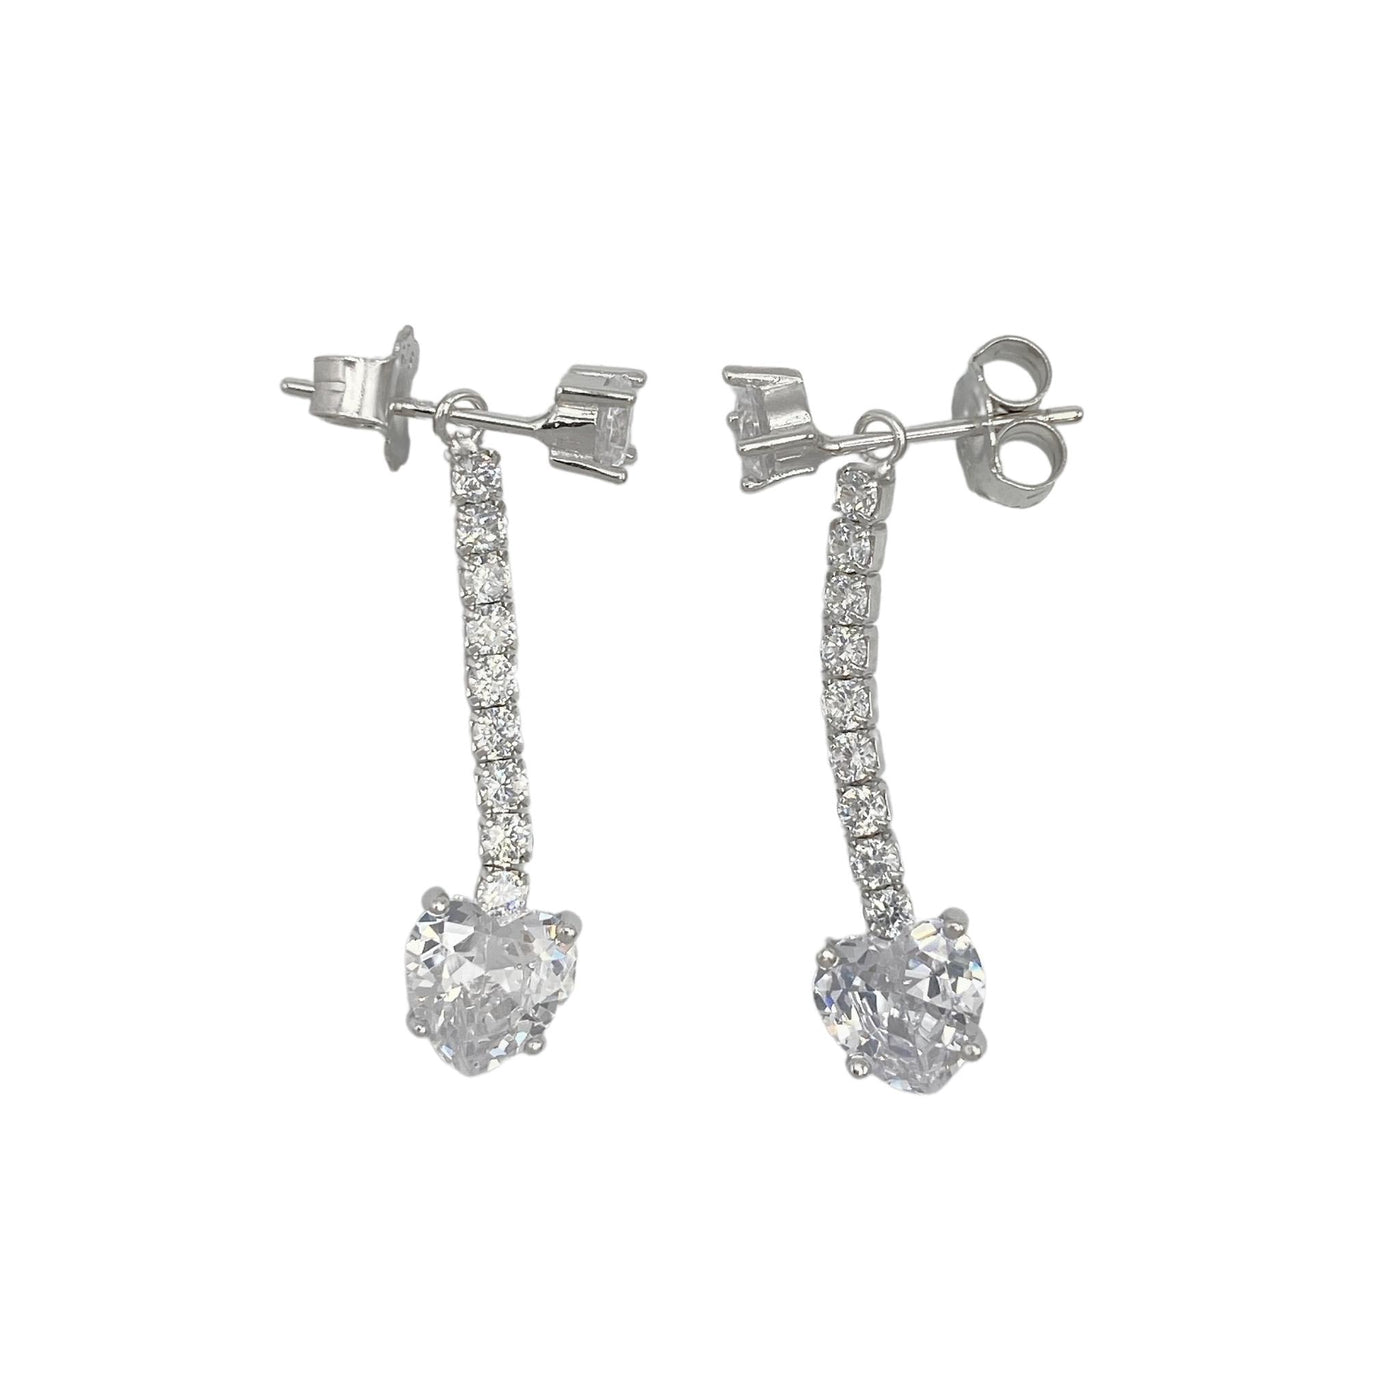 Silver tennis earrings with heart charm